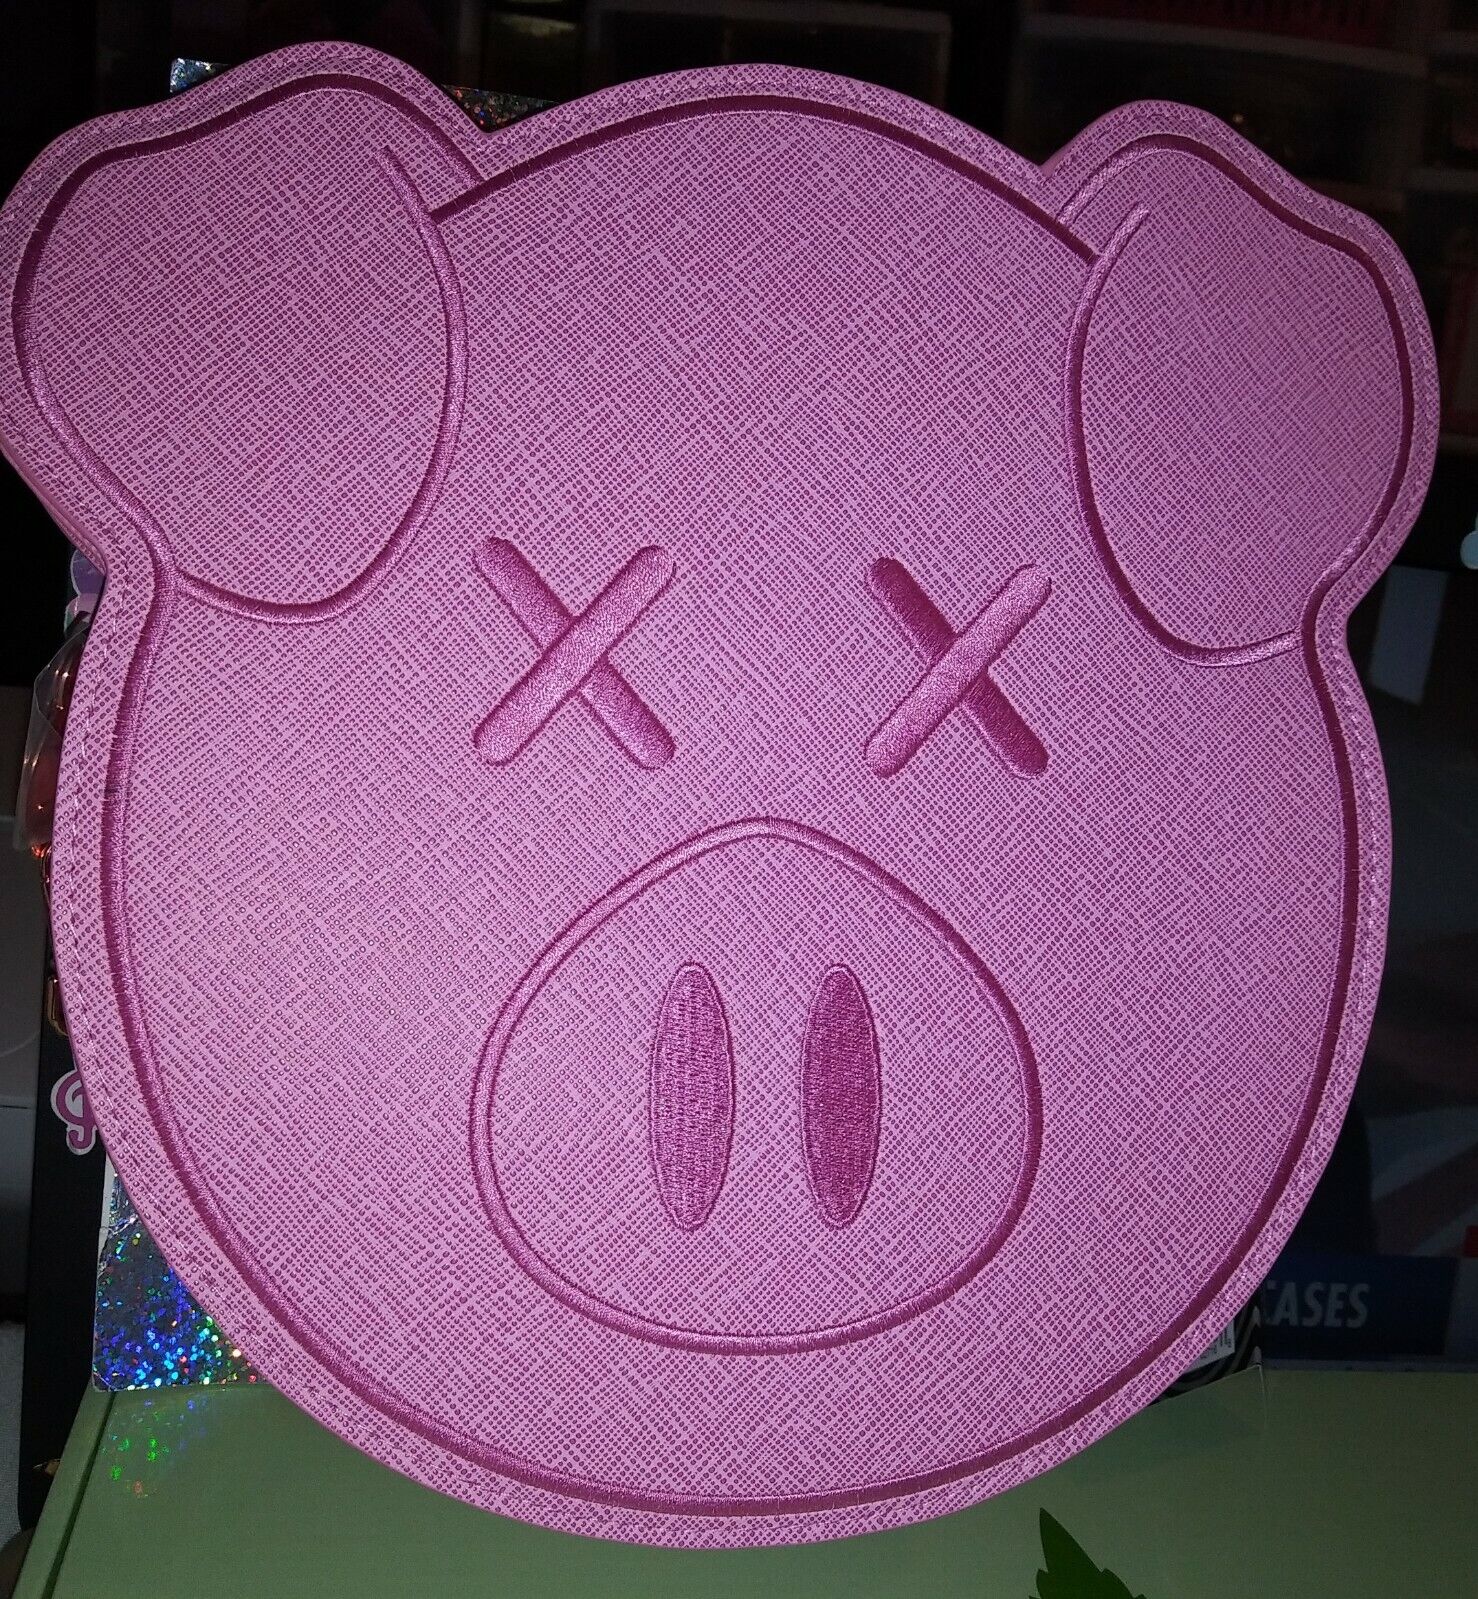 New Shane Dawson x Jeffree Star Pink Pig Side Bag Sold Out New 